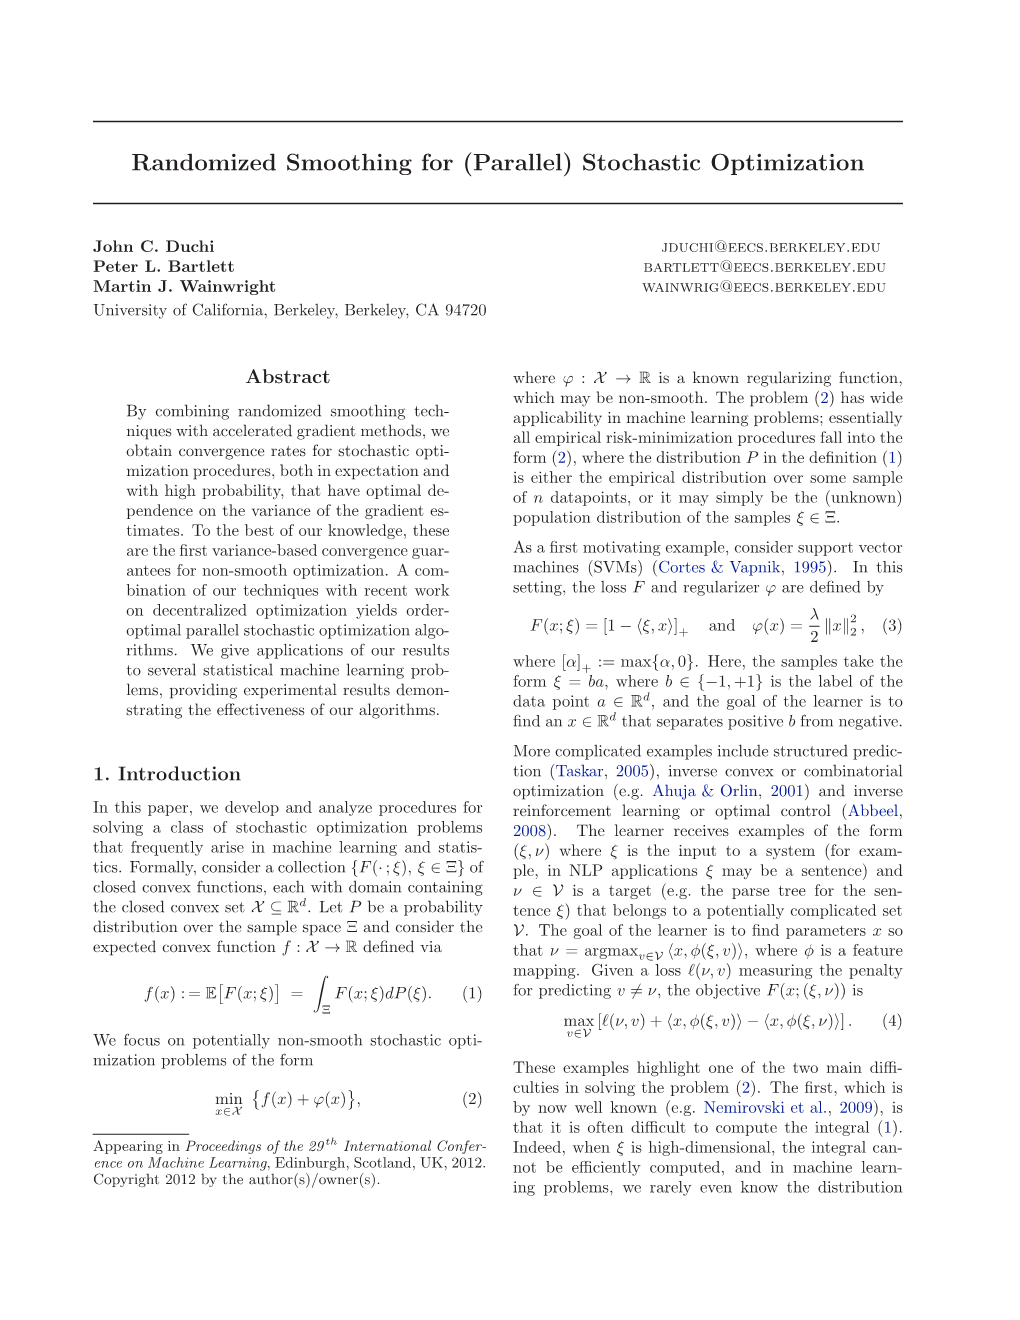 Randomized Smoothing for (Parallel) Stochastic Optimization